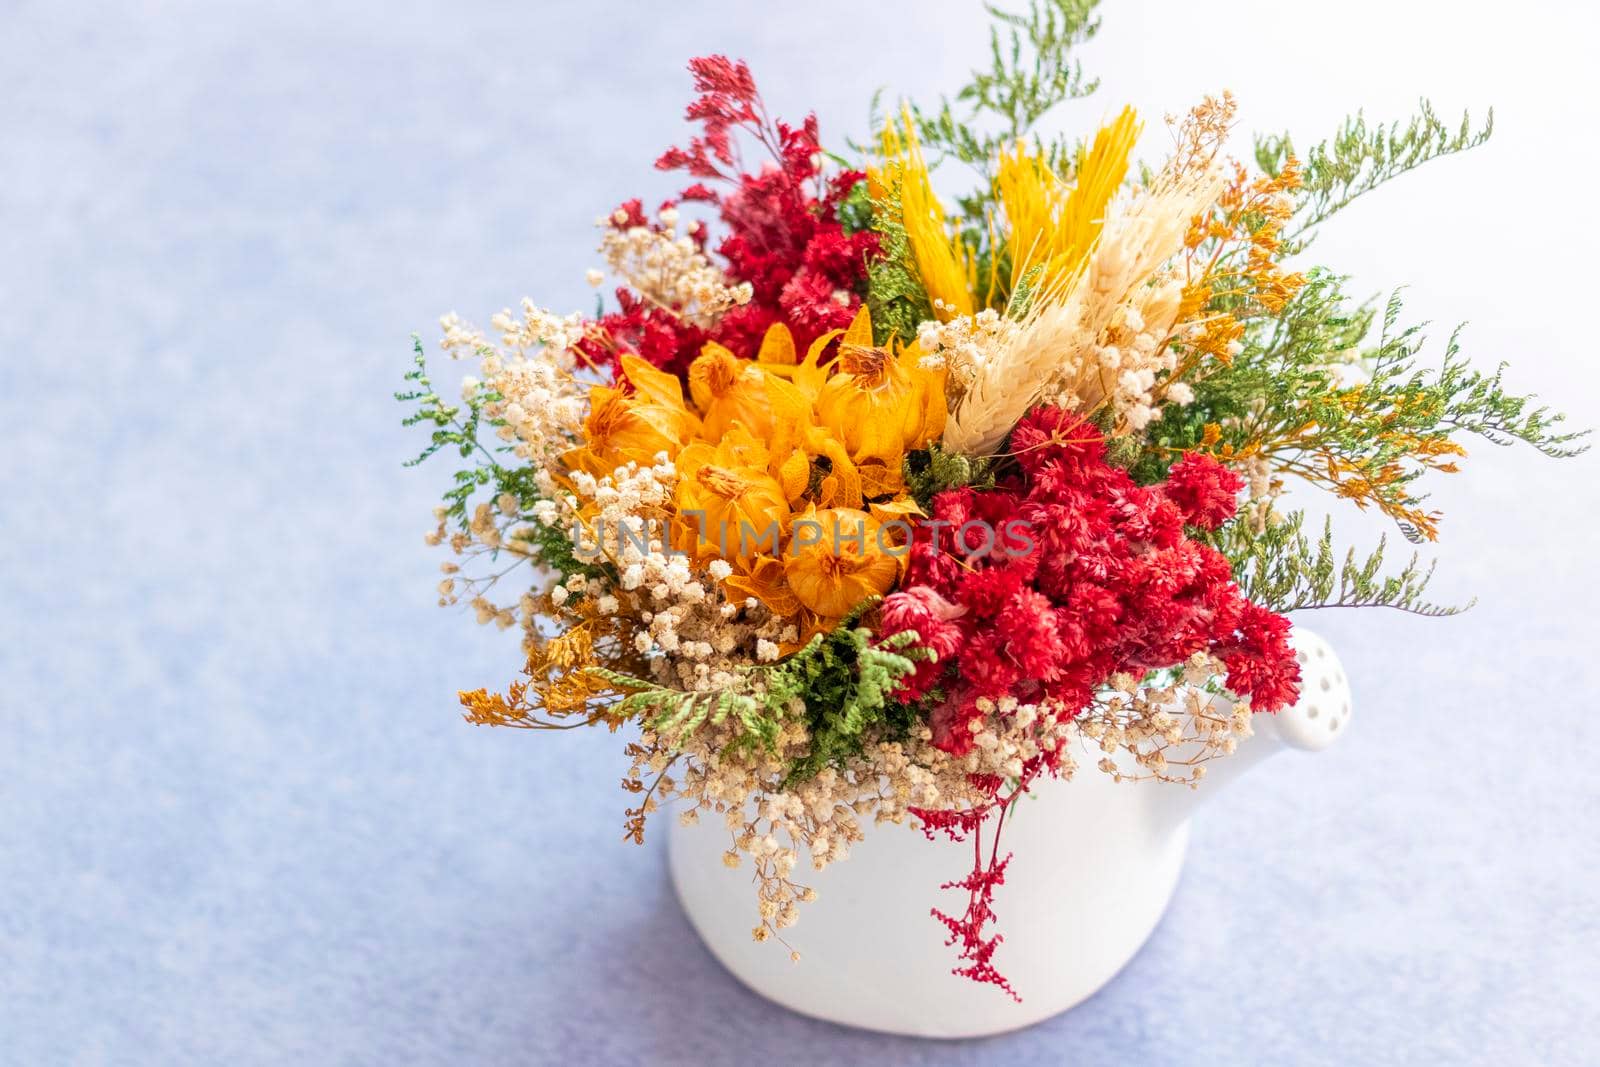 Bouquet of colorful dried flowers by eagg13